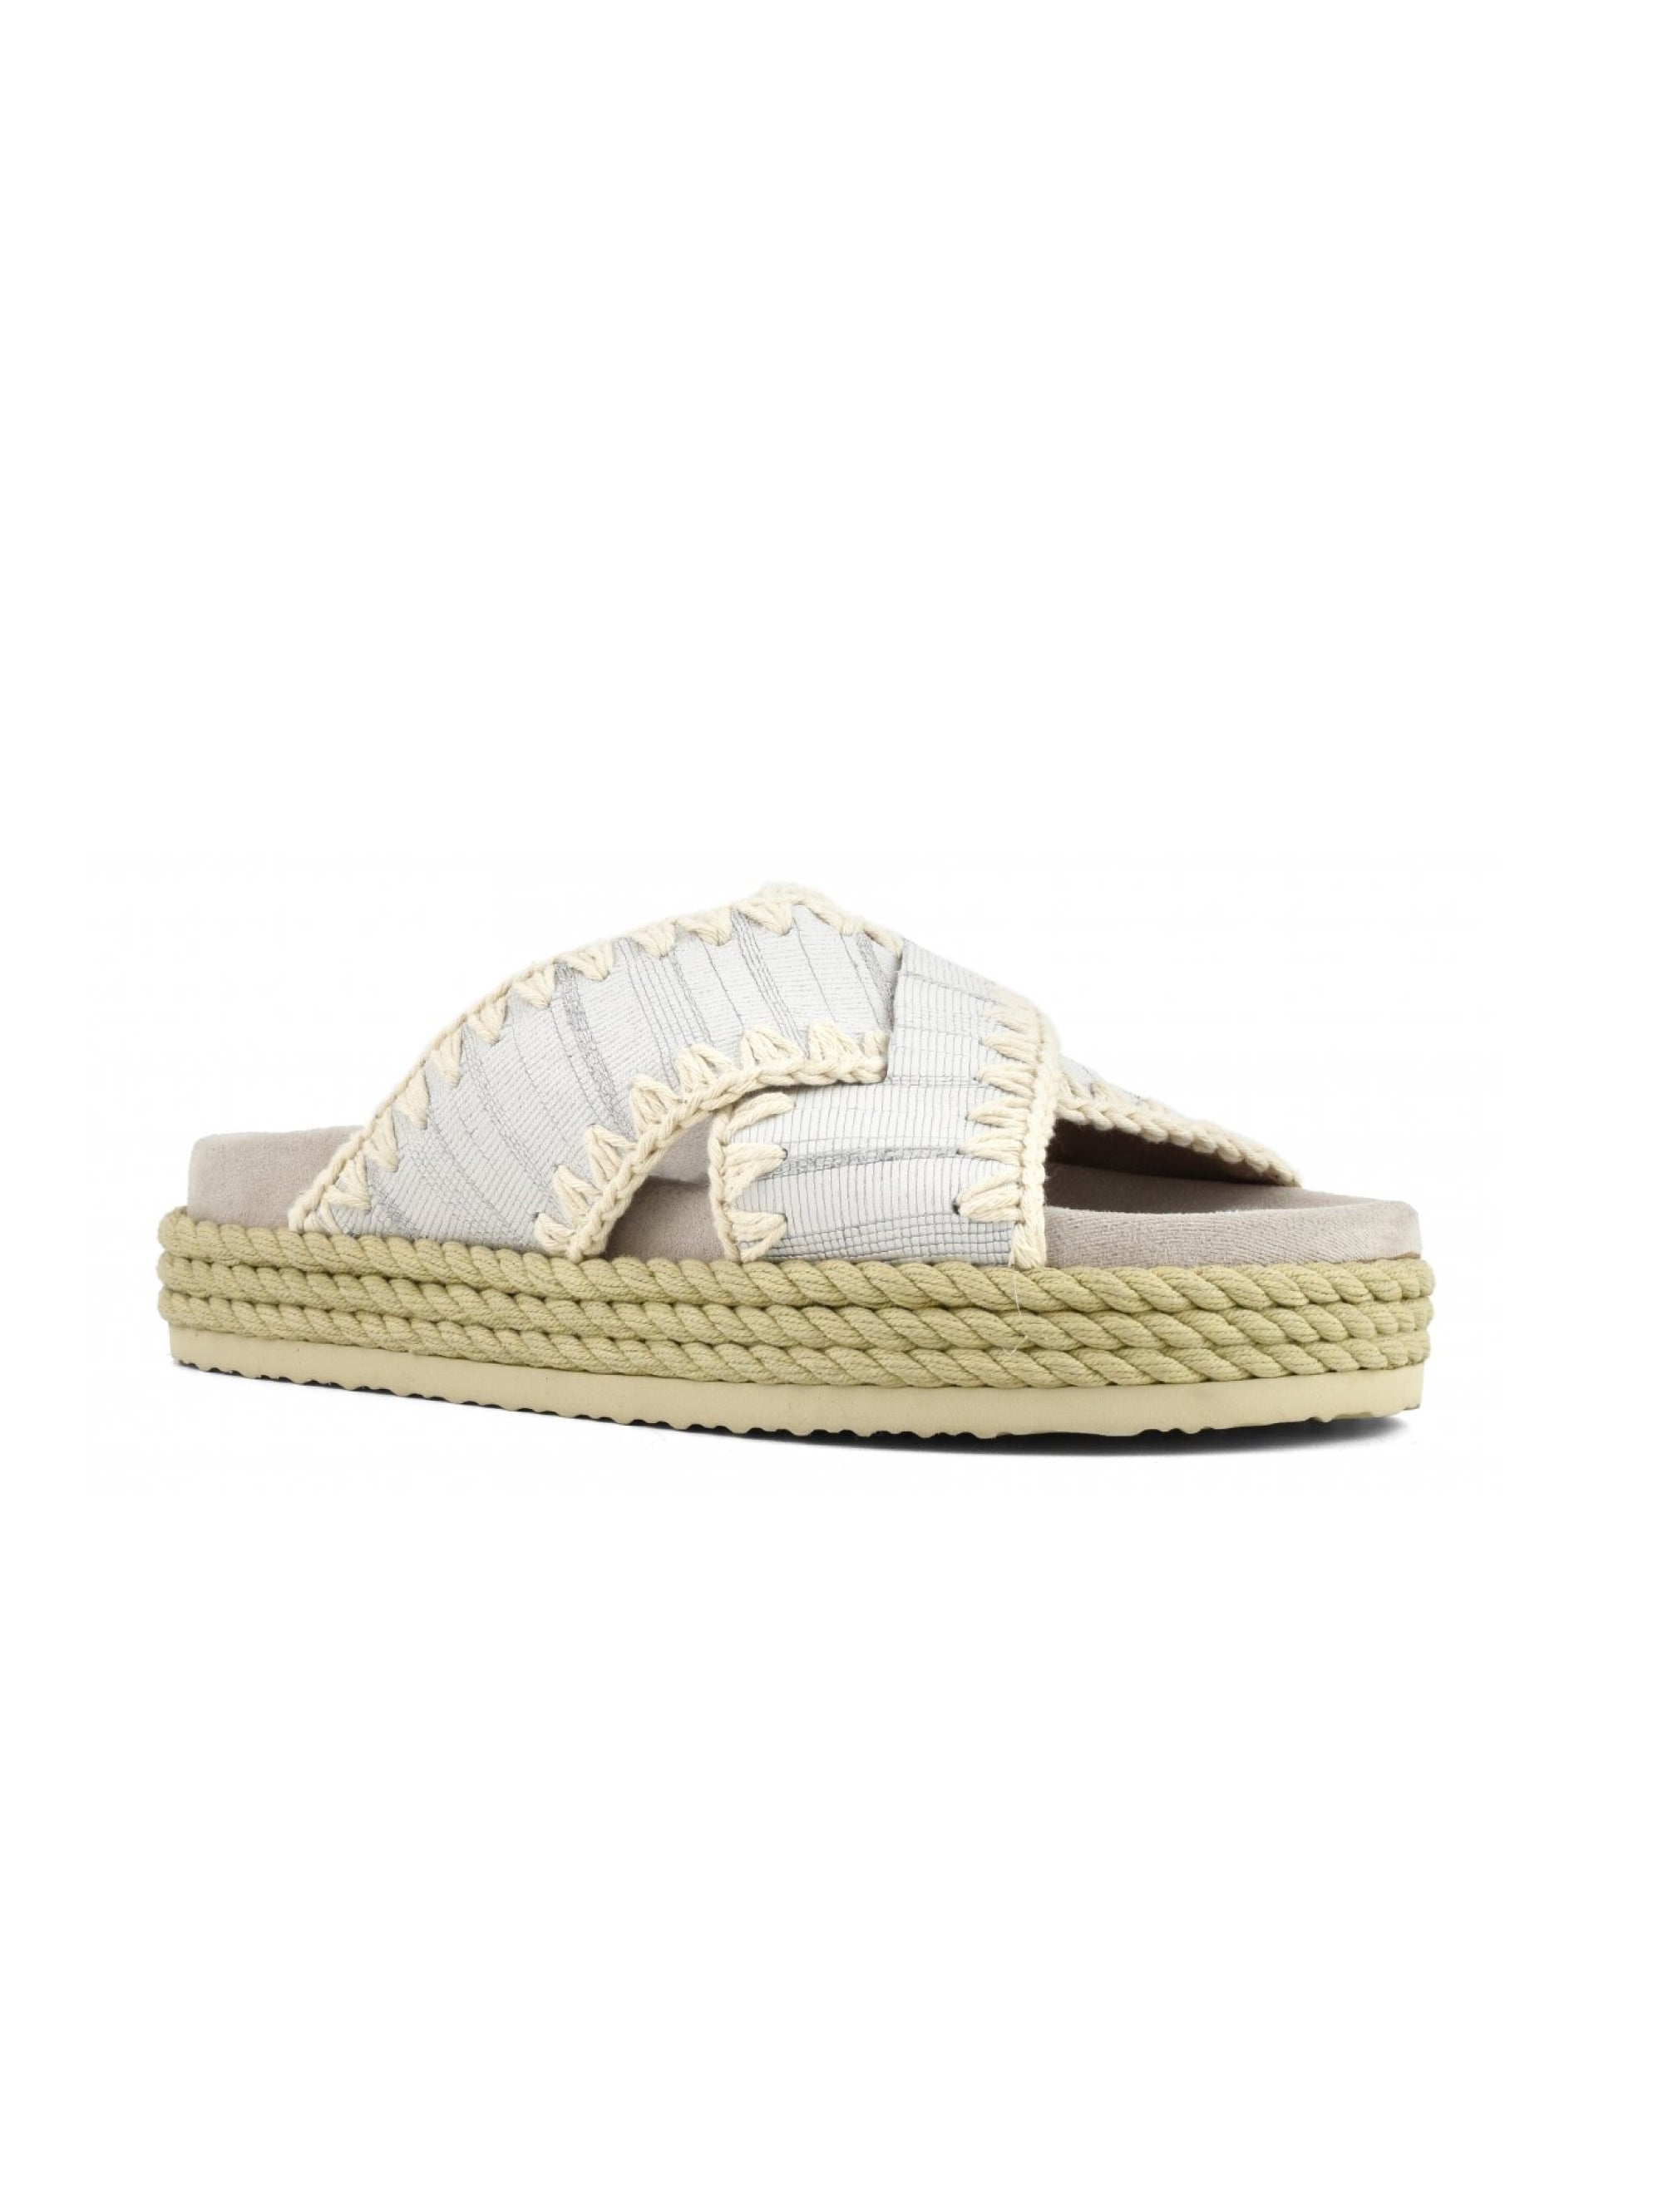 Crossed Bio Sandals in White Leather and Rope